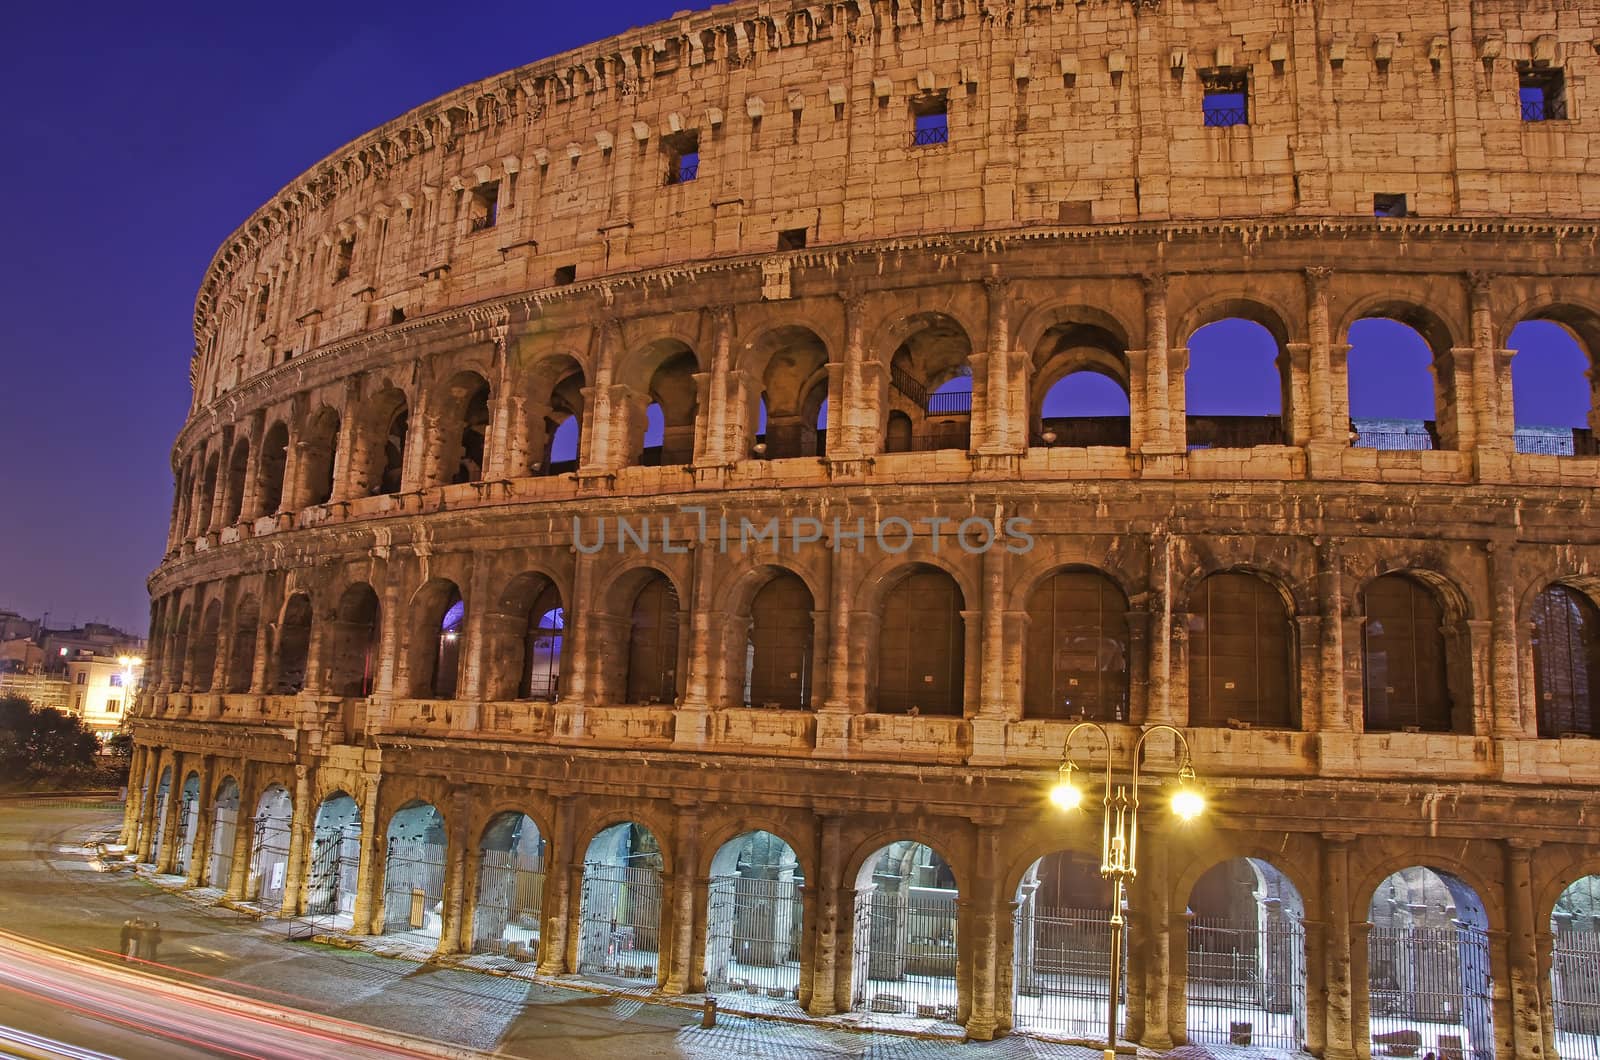 Night view of Colosseum in Rome